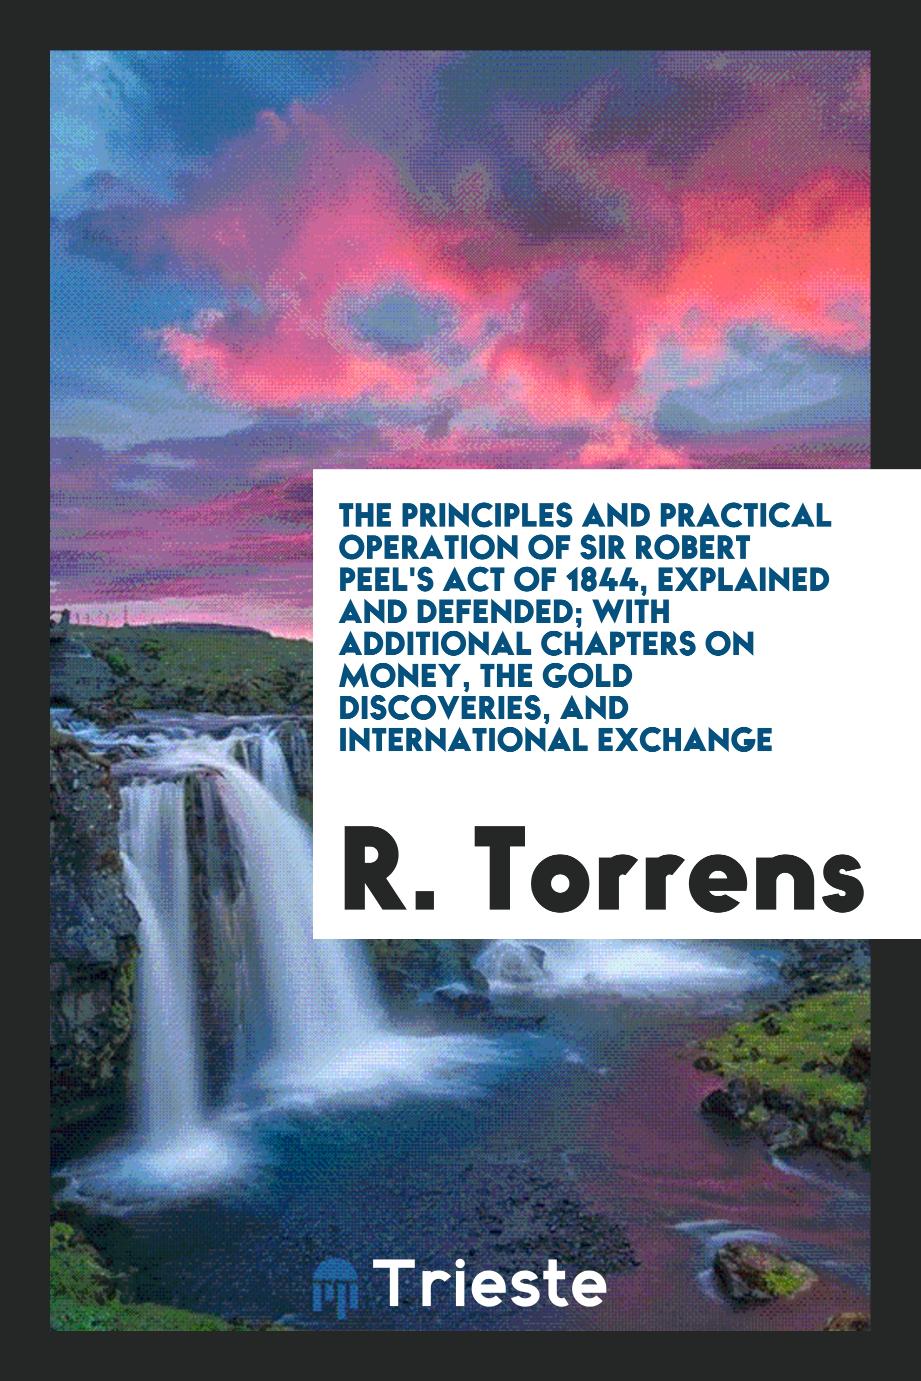 The Principles and Practical Operation of Sir Robert Peel's Act of 1844, Explained and Defended; with Additional Chapters on Money, the Gold Discoveries, and International Exchange